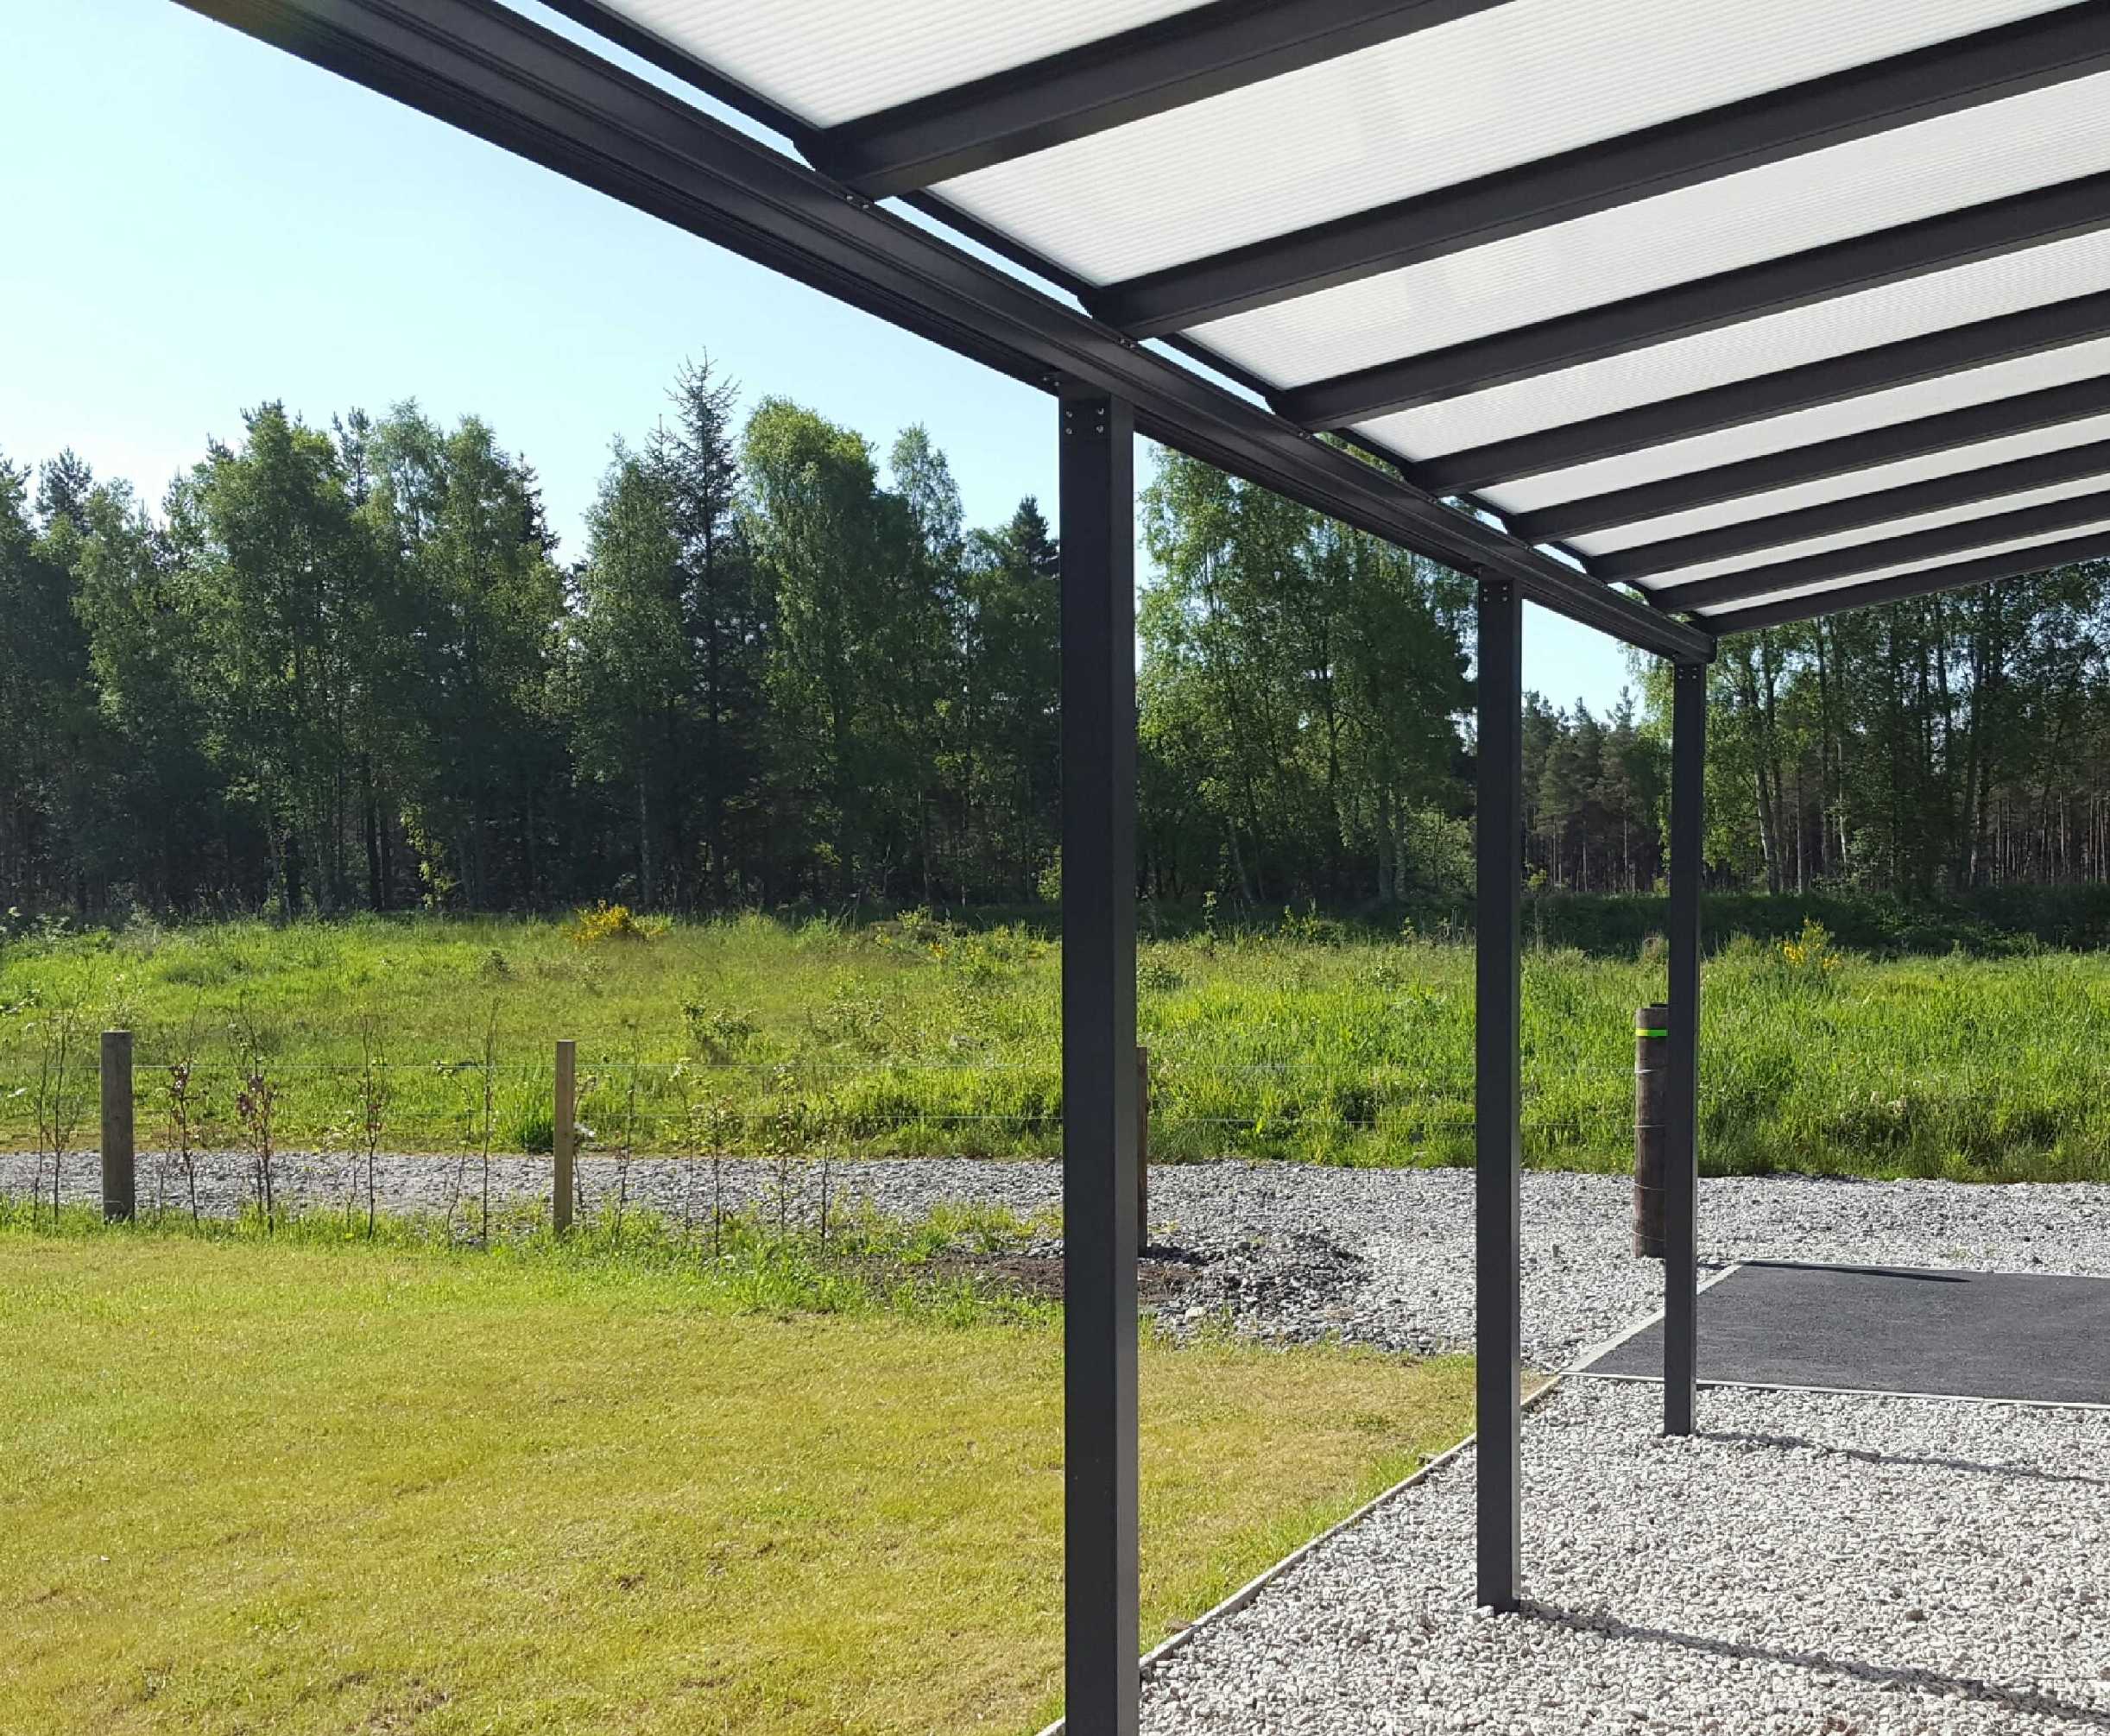 Omega Smart Lean-To Canopy, Anthracite Grey, 6mm Glass Clear Plate Polycarbonate Glazing - 10.0m (W) x 4.0m (P), (5) Supporting Posts